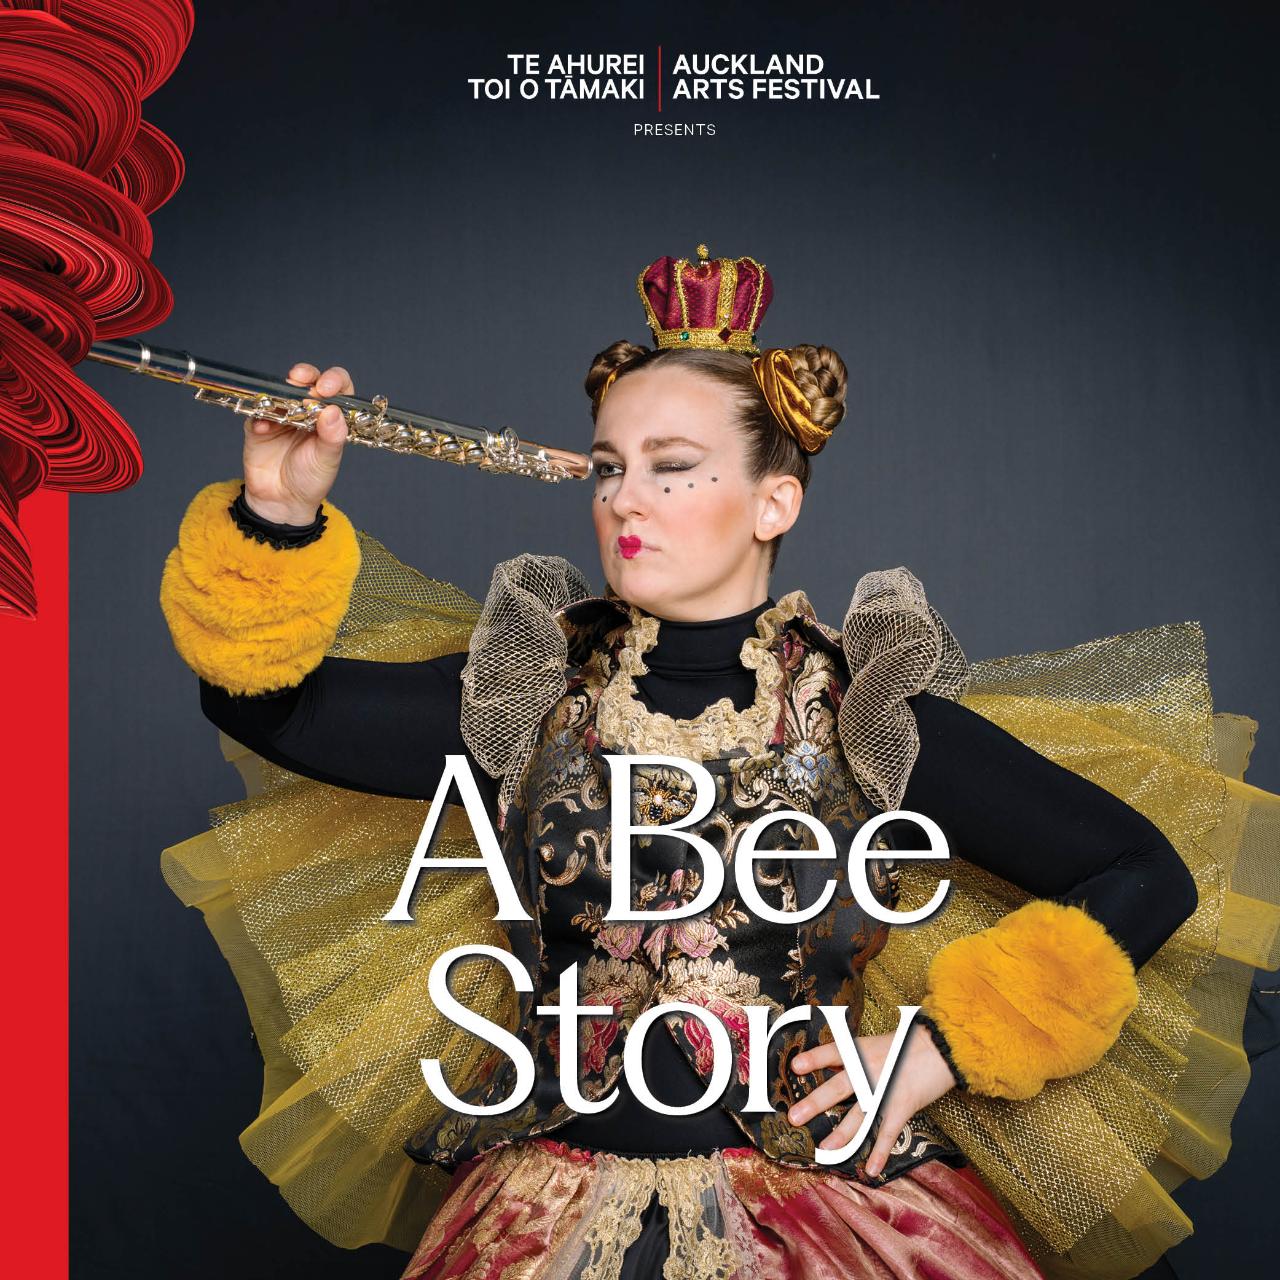 A Bee Story - Auckland Arts Festival